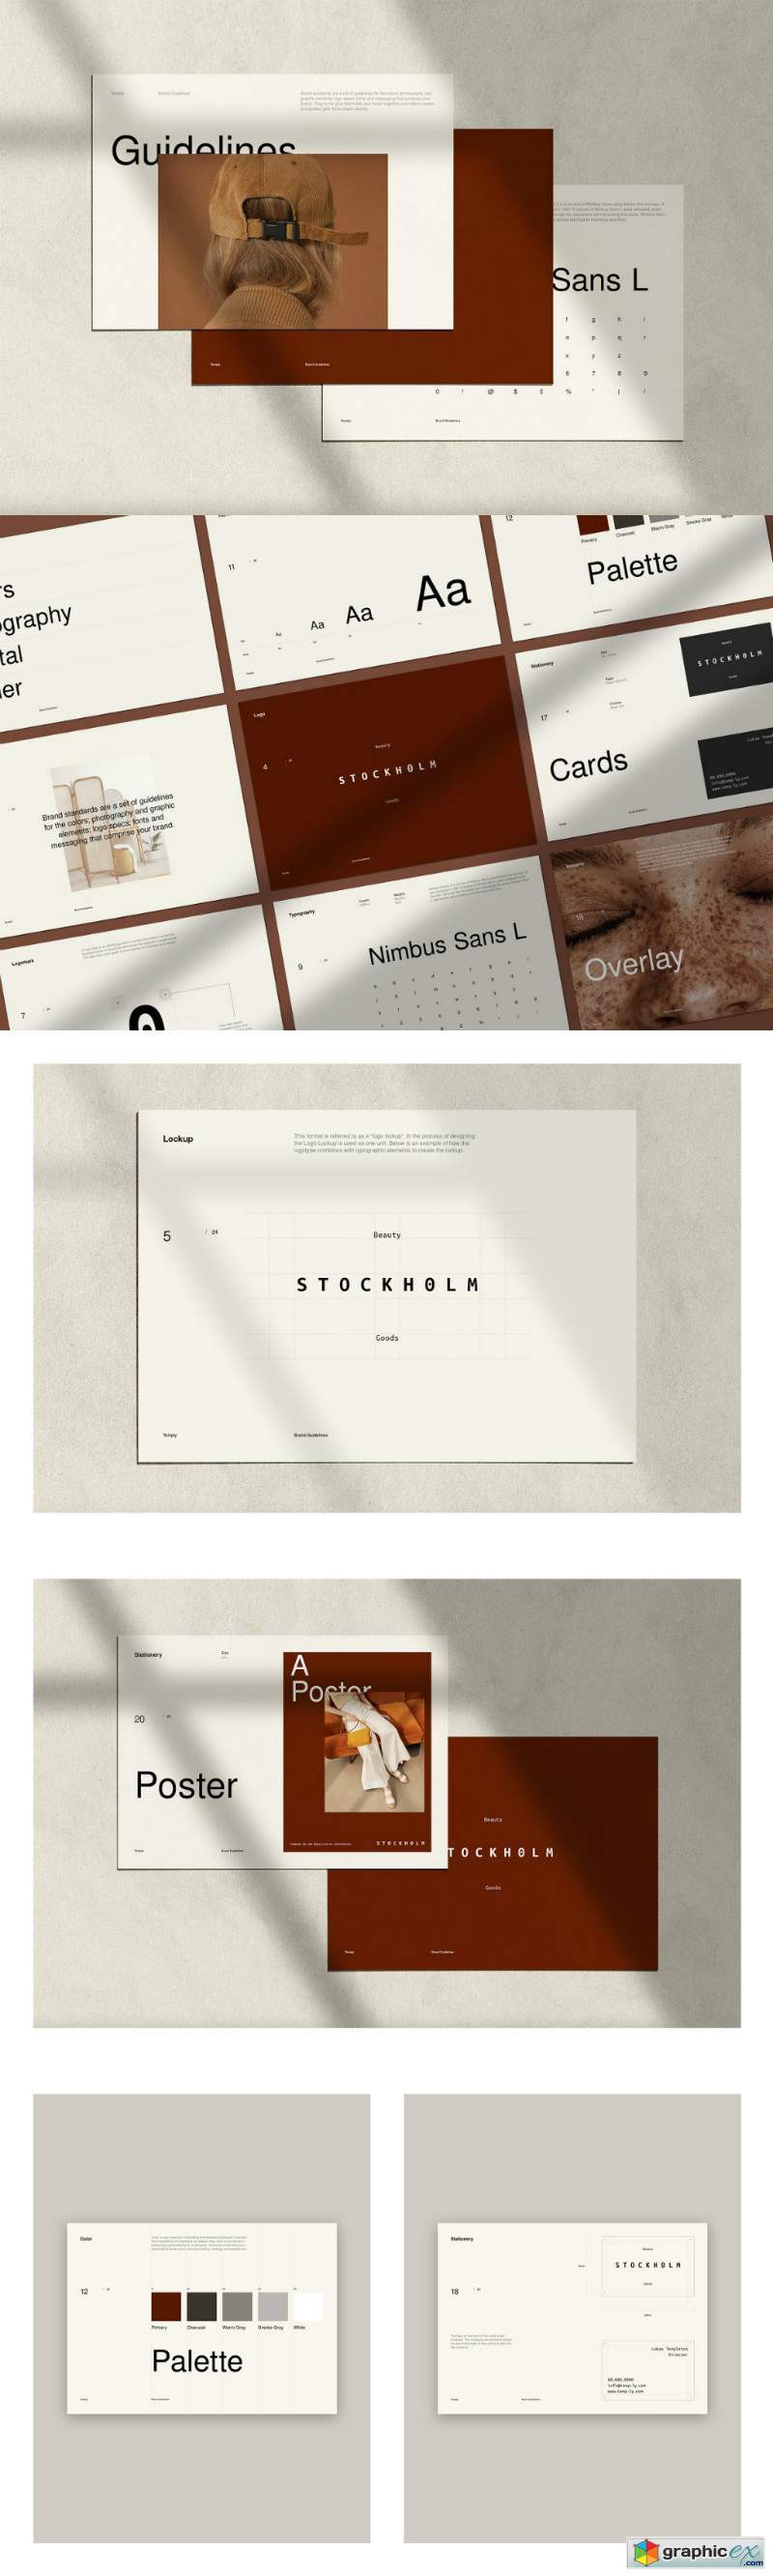 Brand Guidelines 3701896